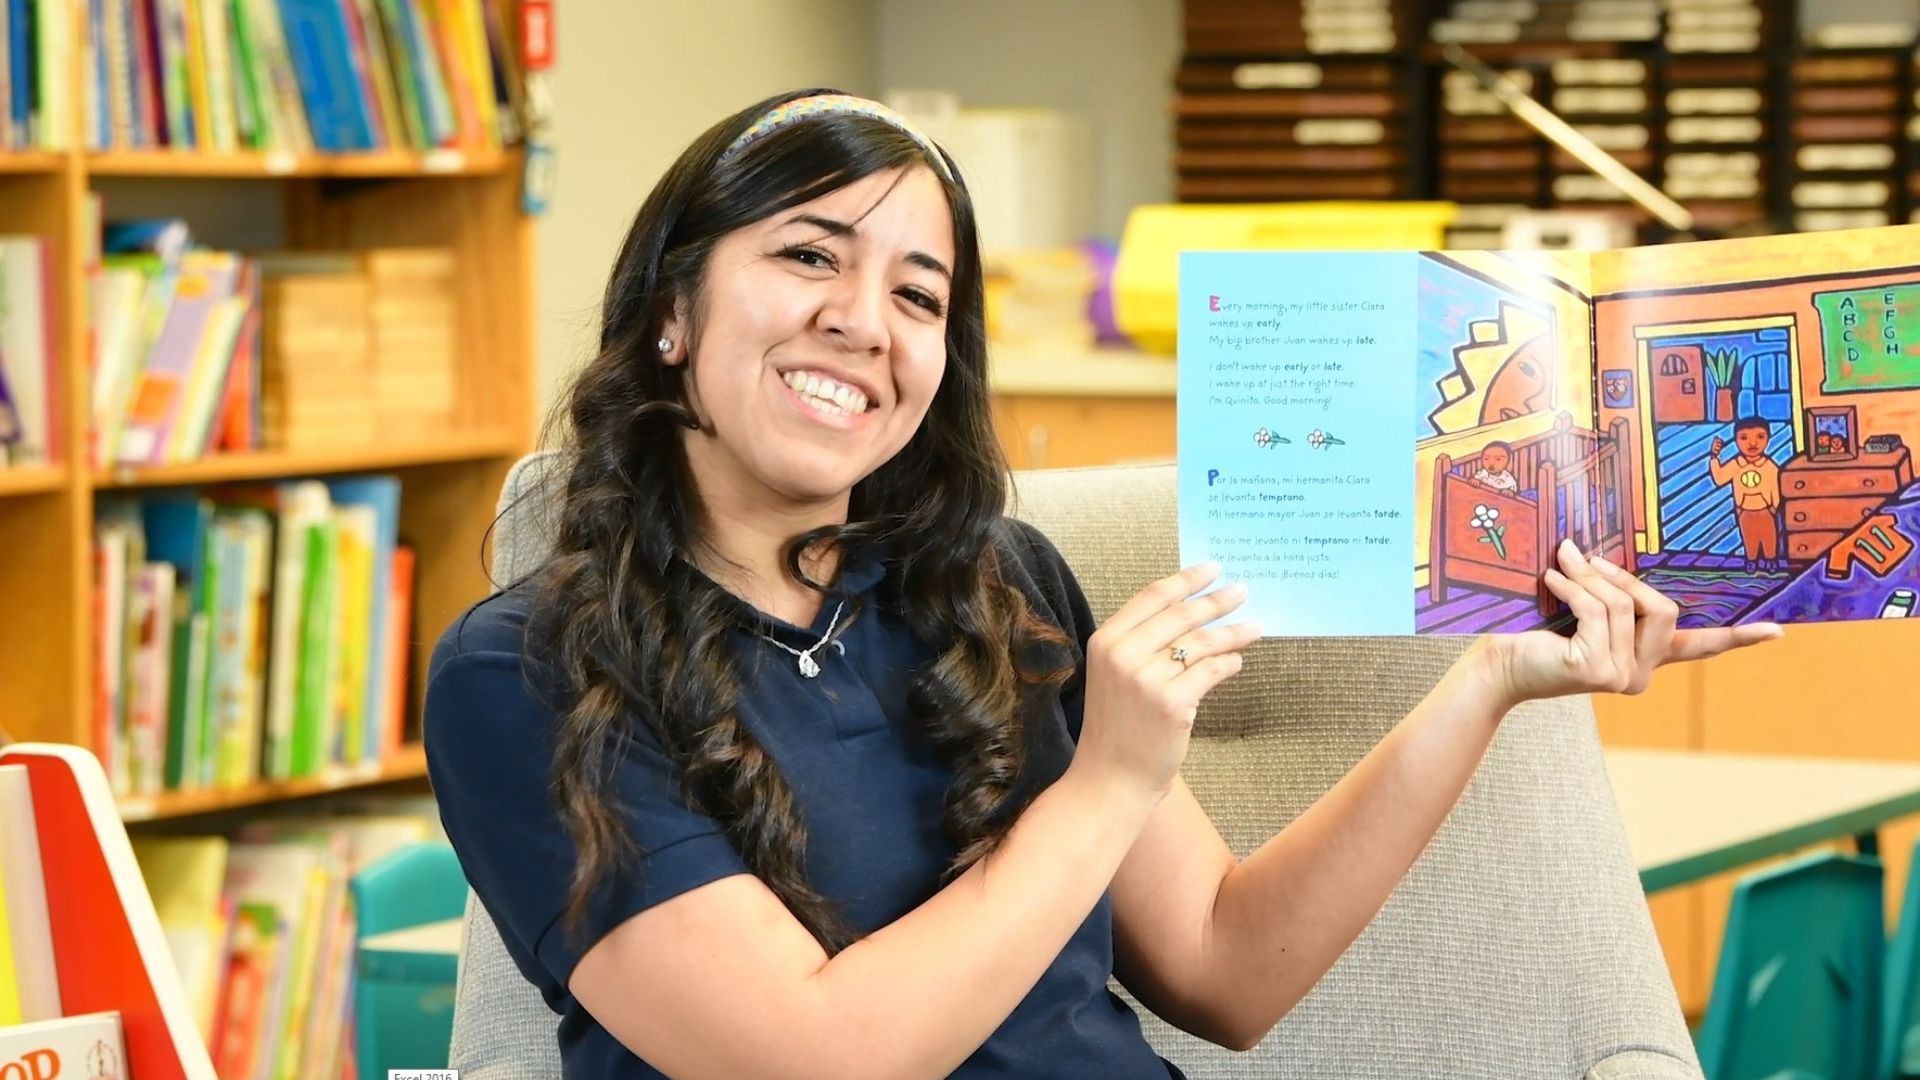 Image of staff displaying book for Story Time